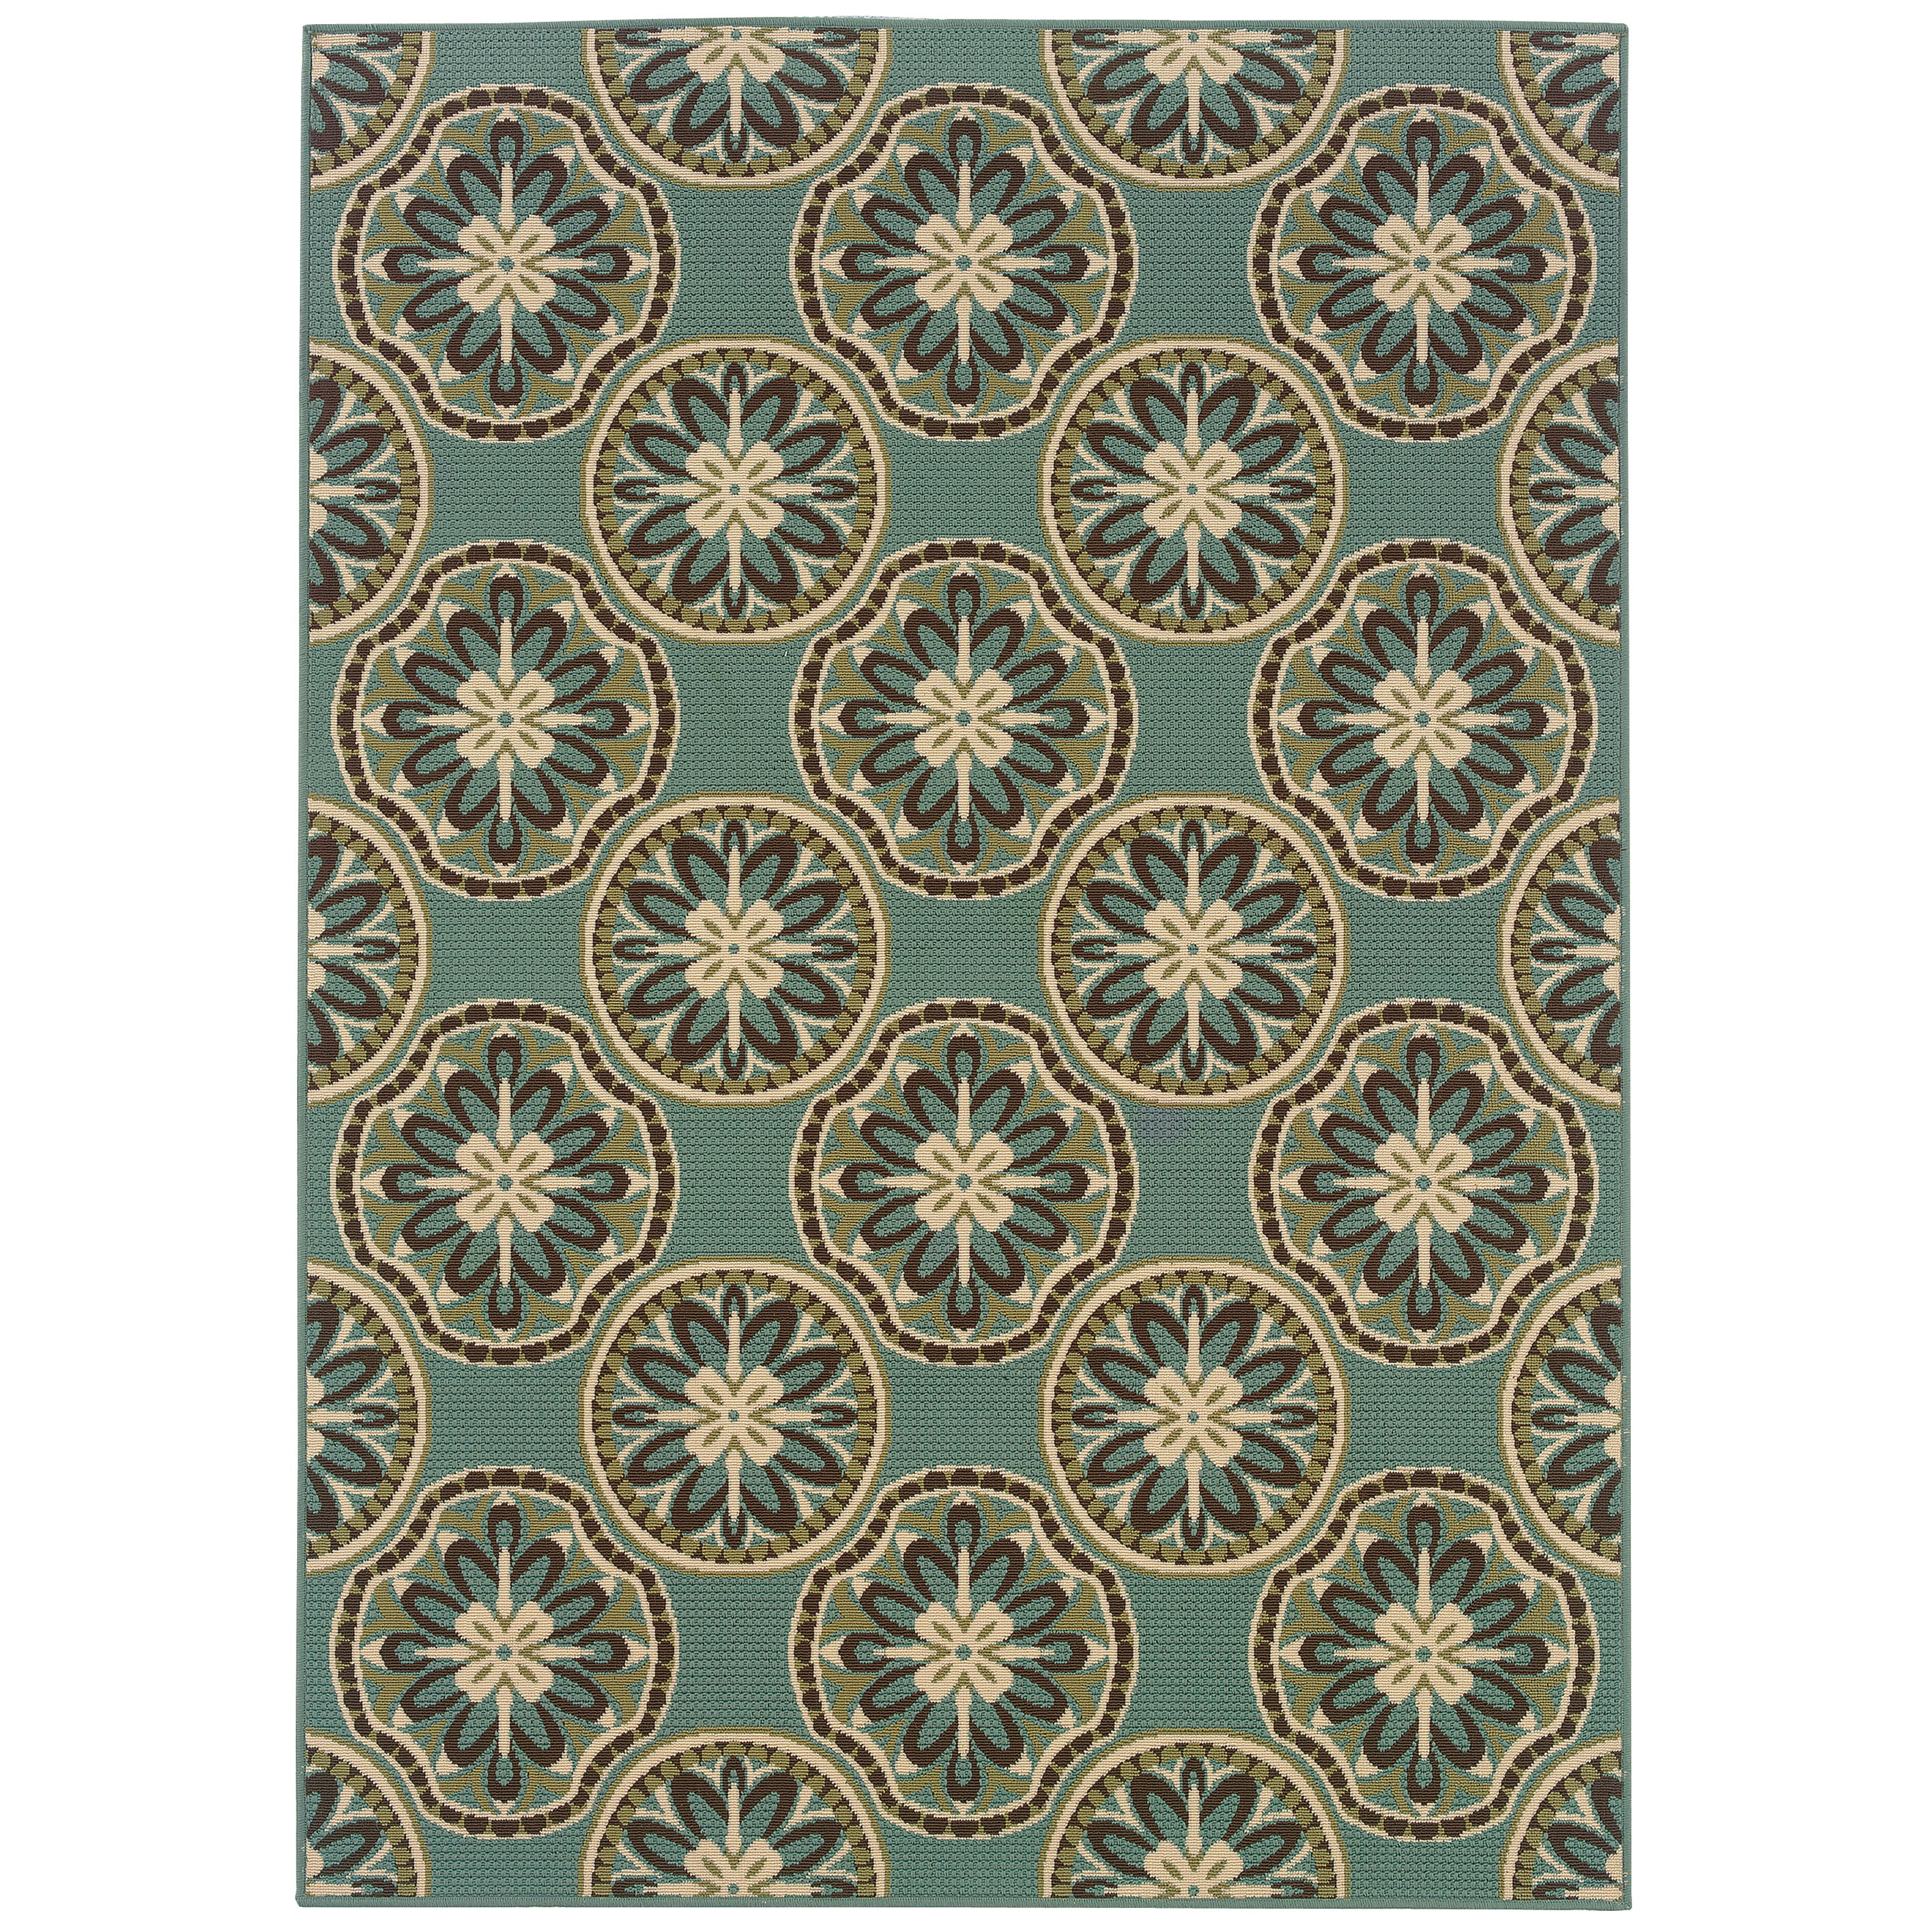 "Darya Home Daniel Collection Outdoor Floral Outdoor 2 x 4"